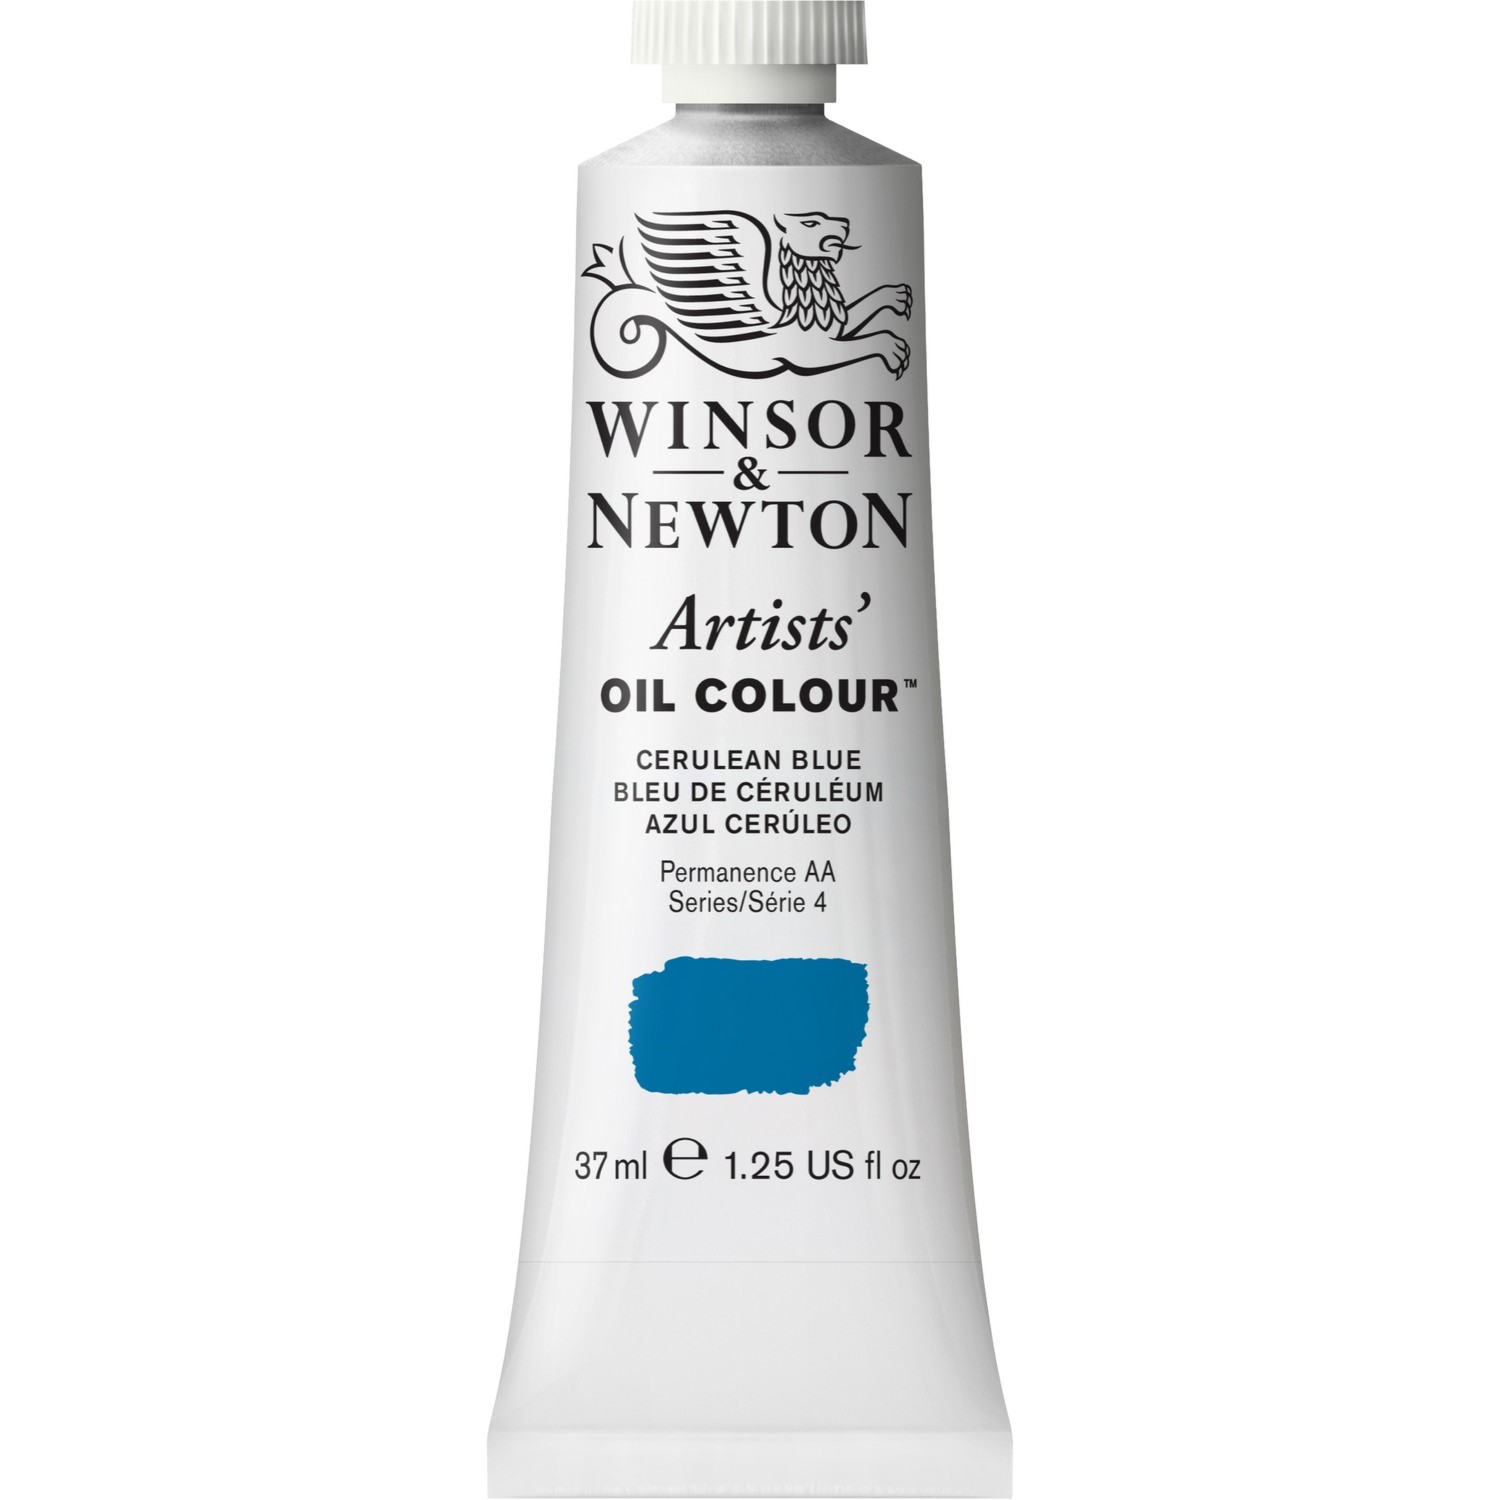 Winsor and Newton 37ml Artists' Oil Colours - Cerulean Blue Image 1